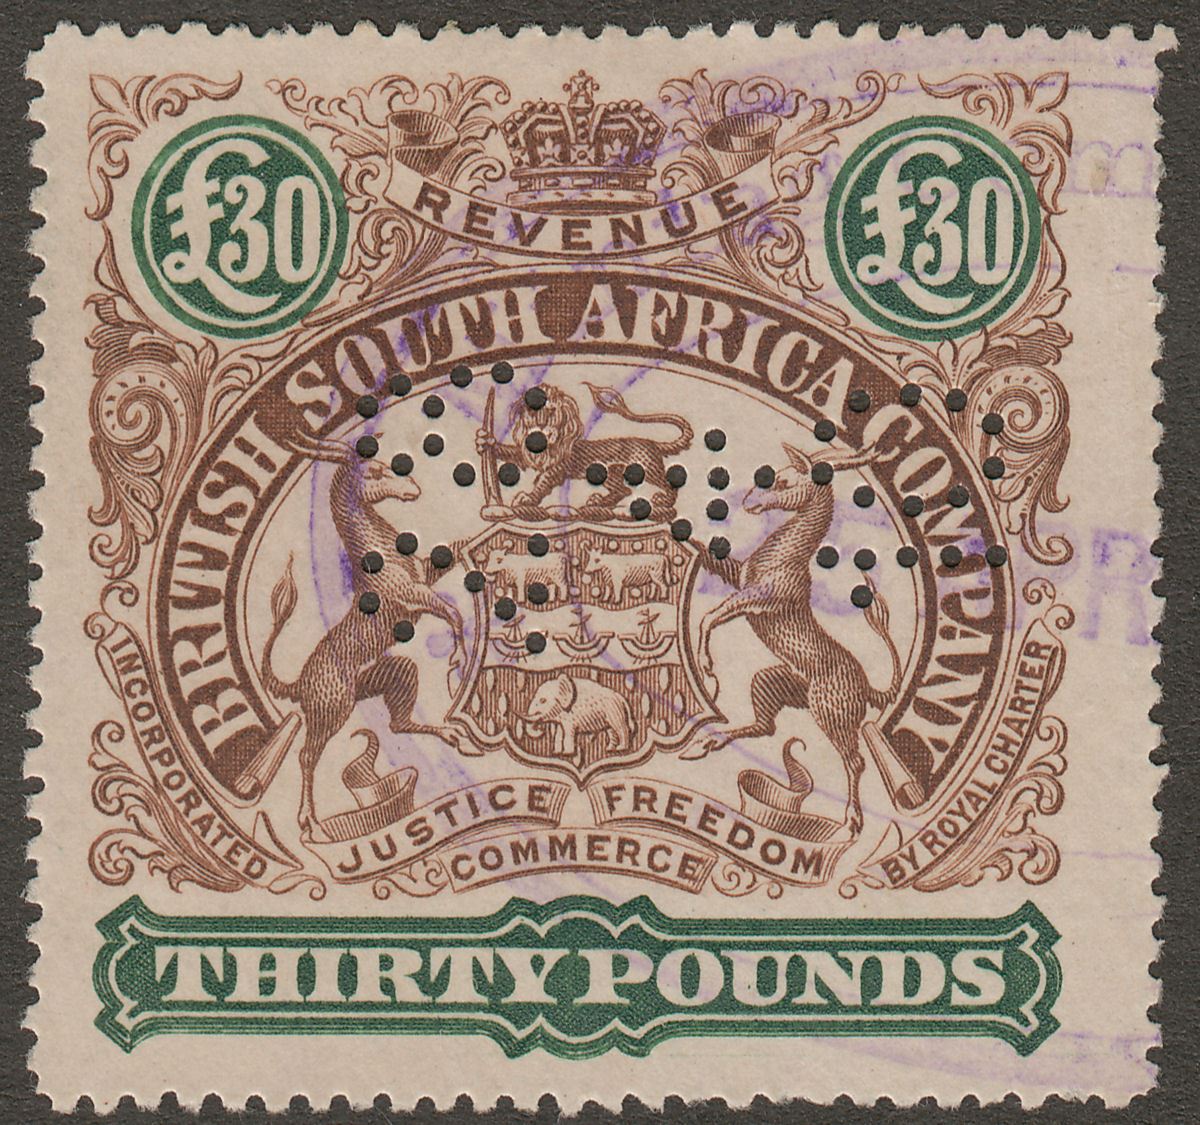 Rhodesia BSAC 1897 Revenue Arms £30 Brown and Green Used with Date perfin BF11a